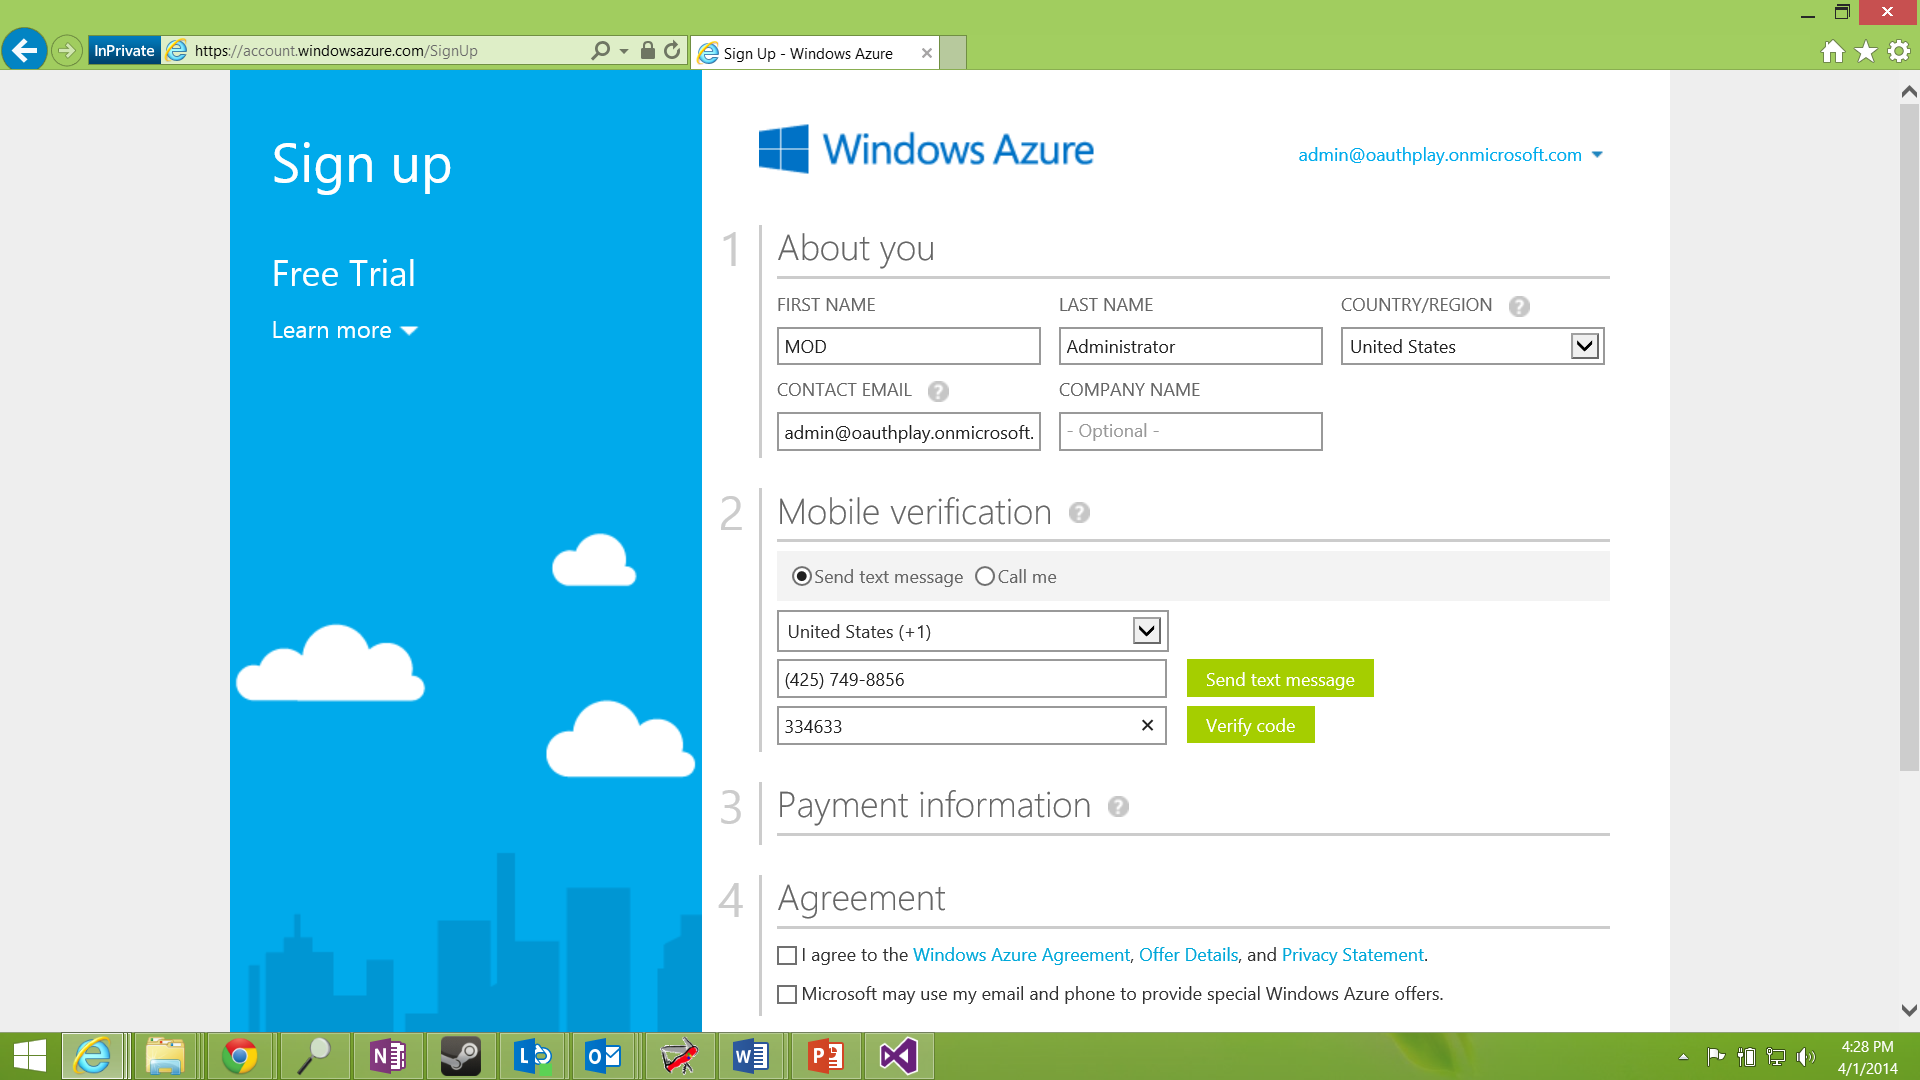 A screenshot of the "Mobile verification" section of the Azure sign-up page.